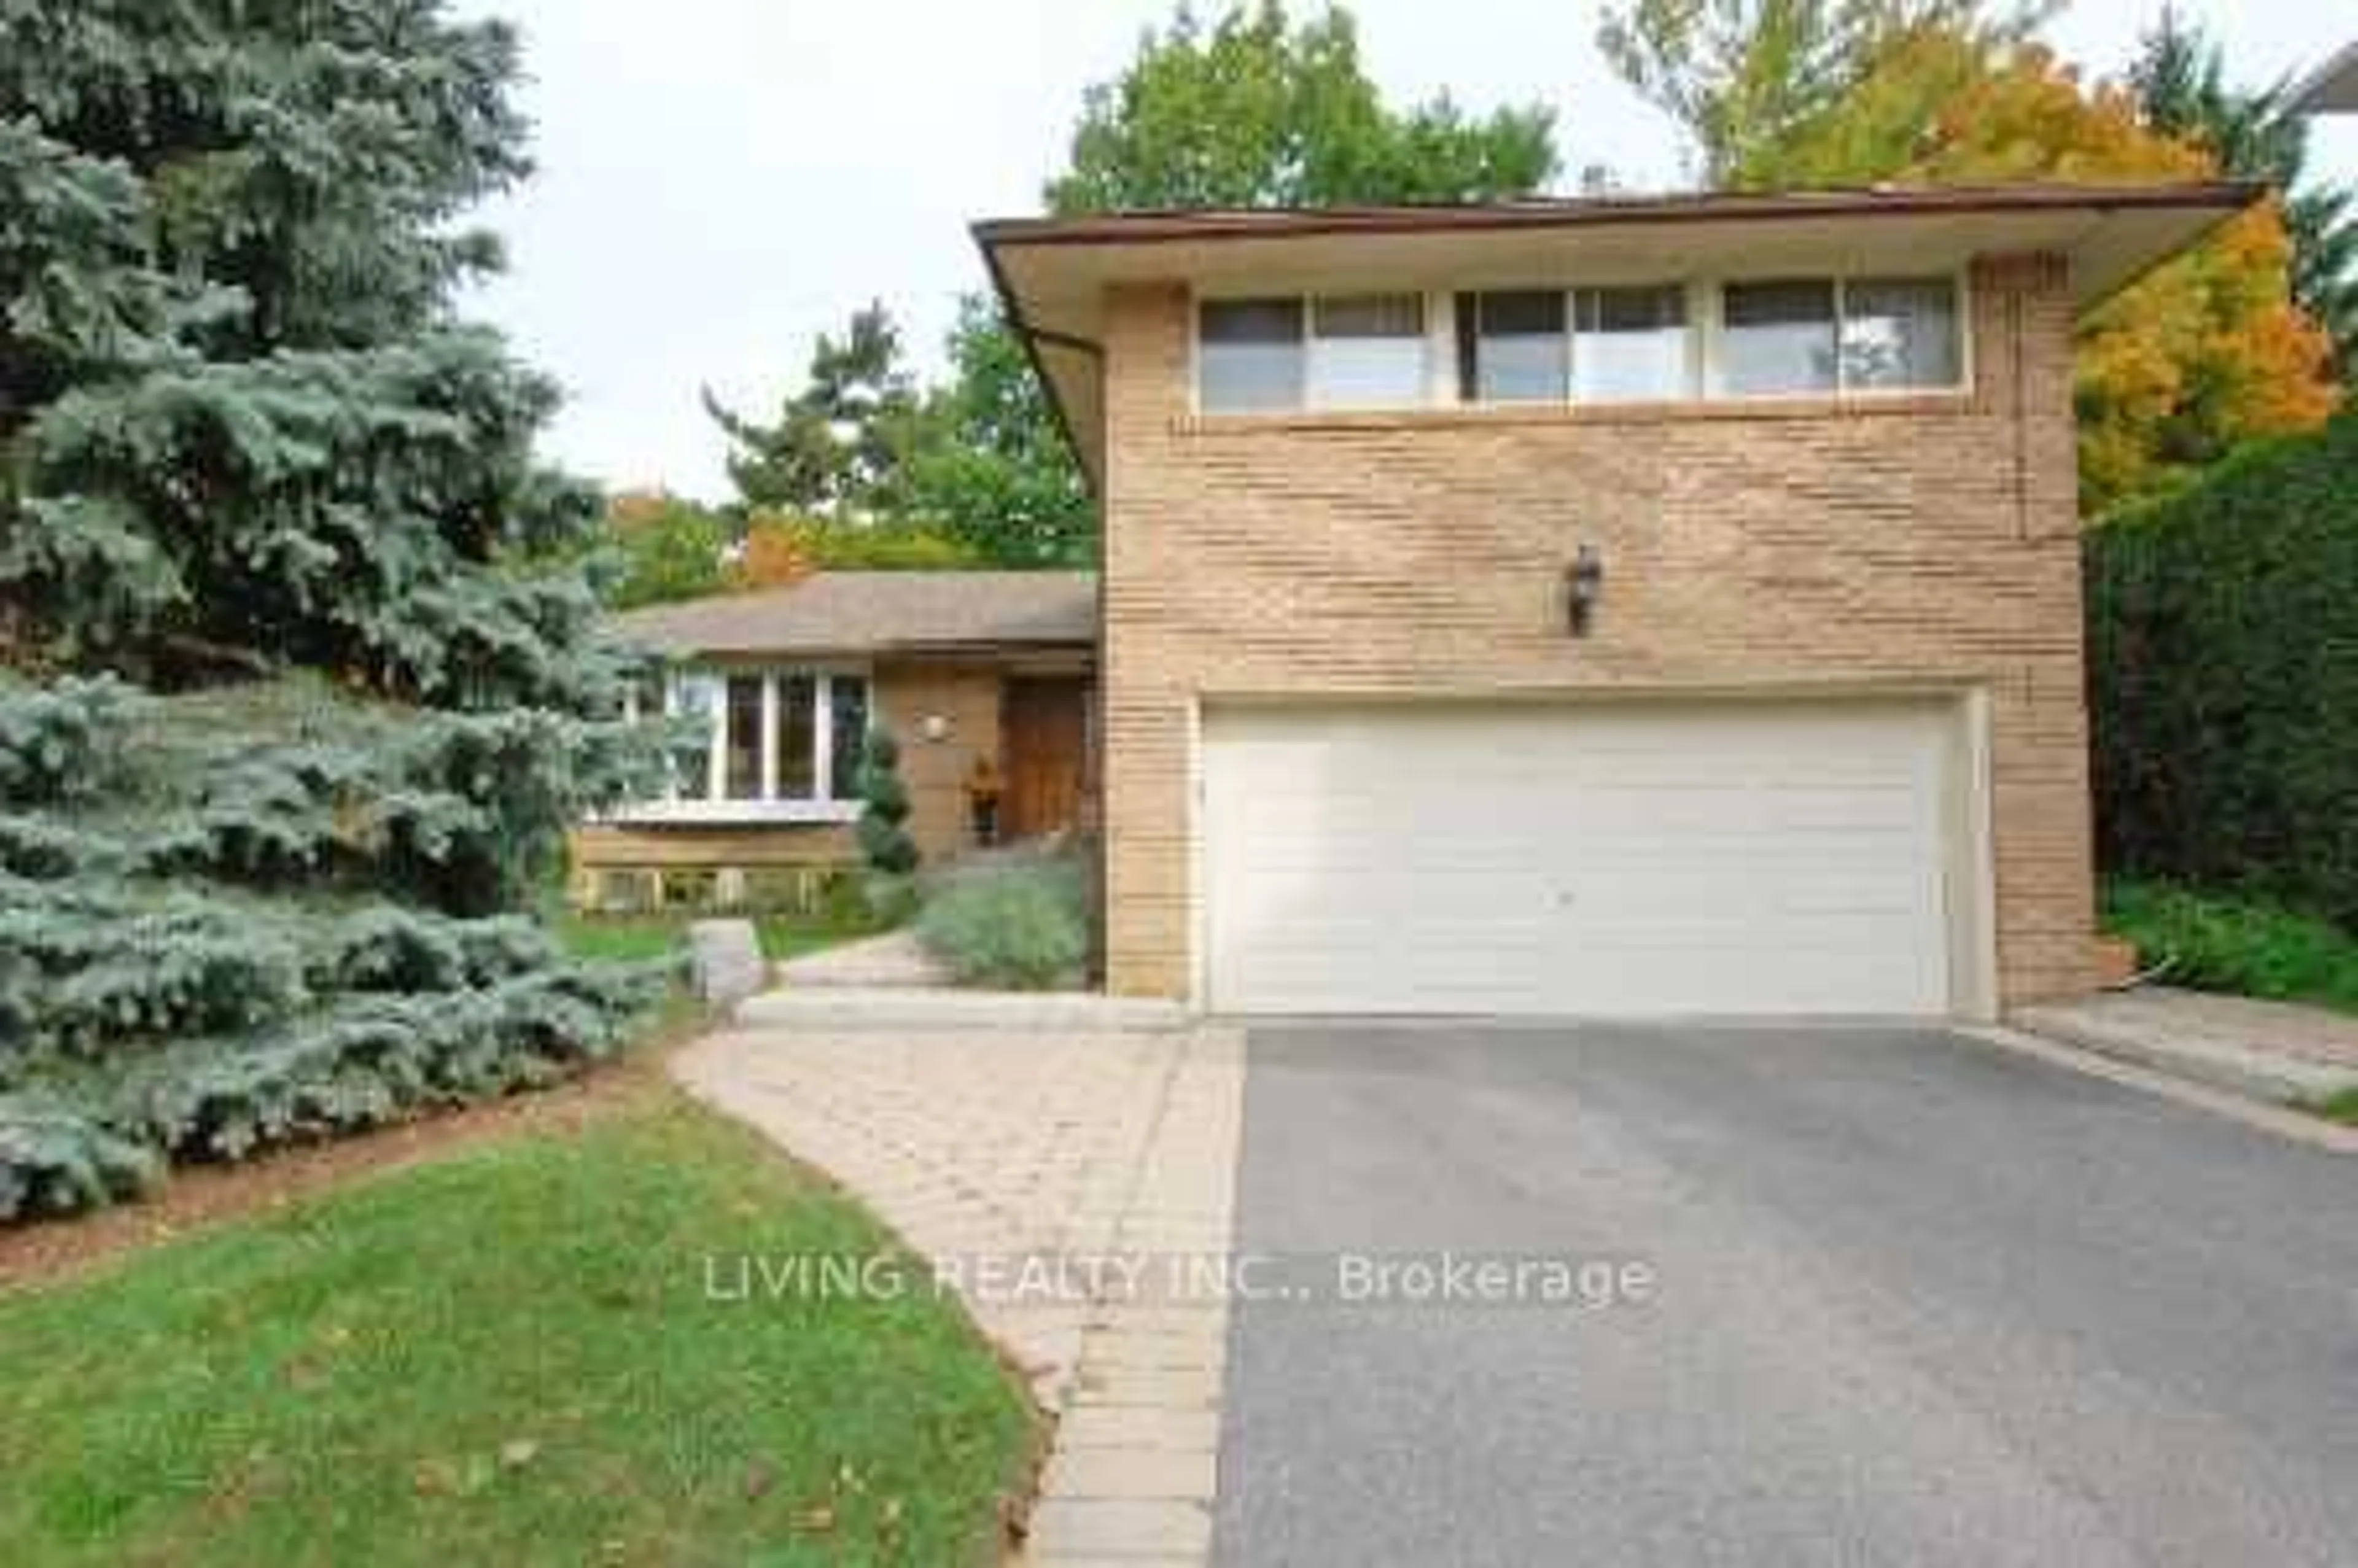 Home with brick exterior material for 6 Hillavon Dr, Toronto Ontario M9B 2P5